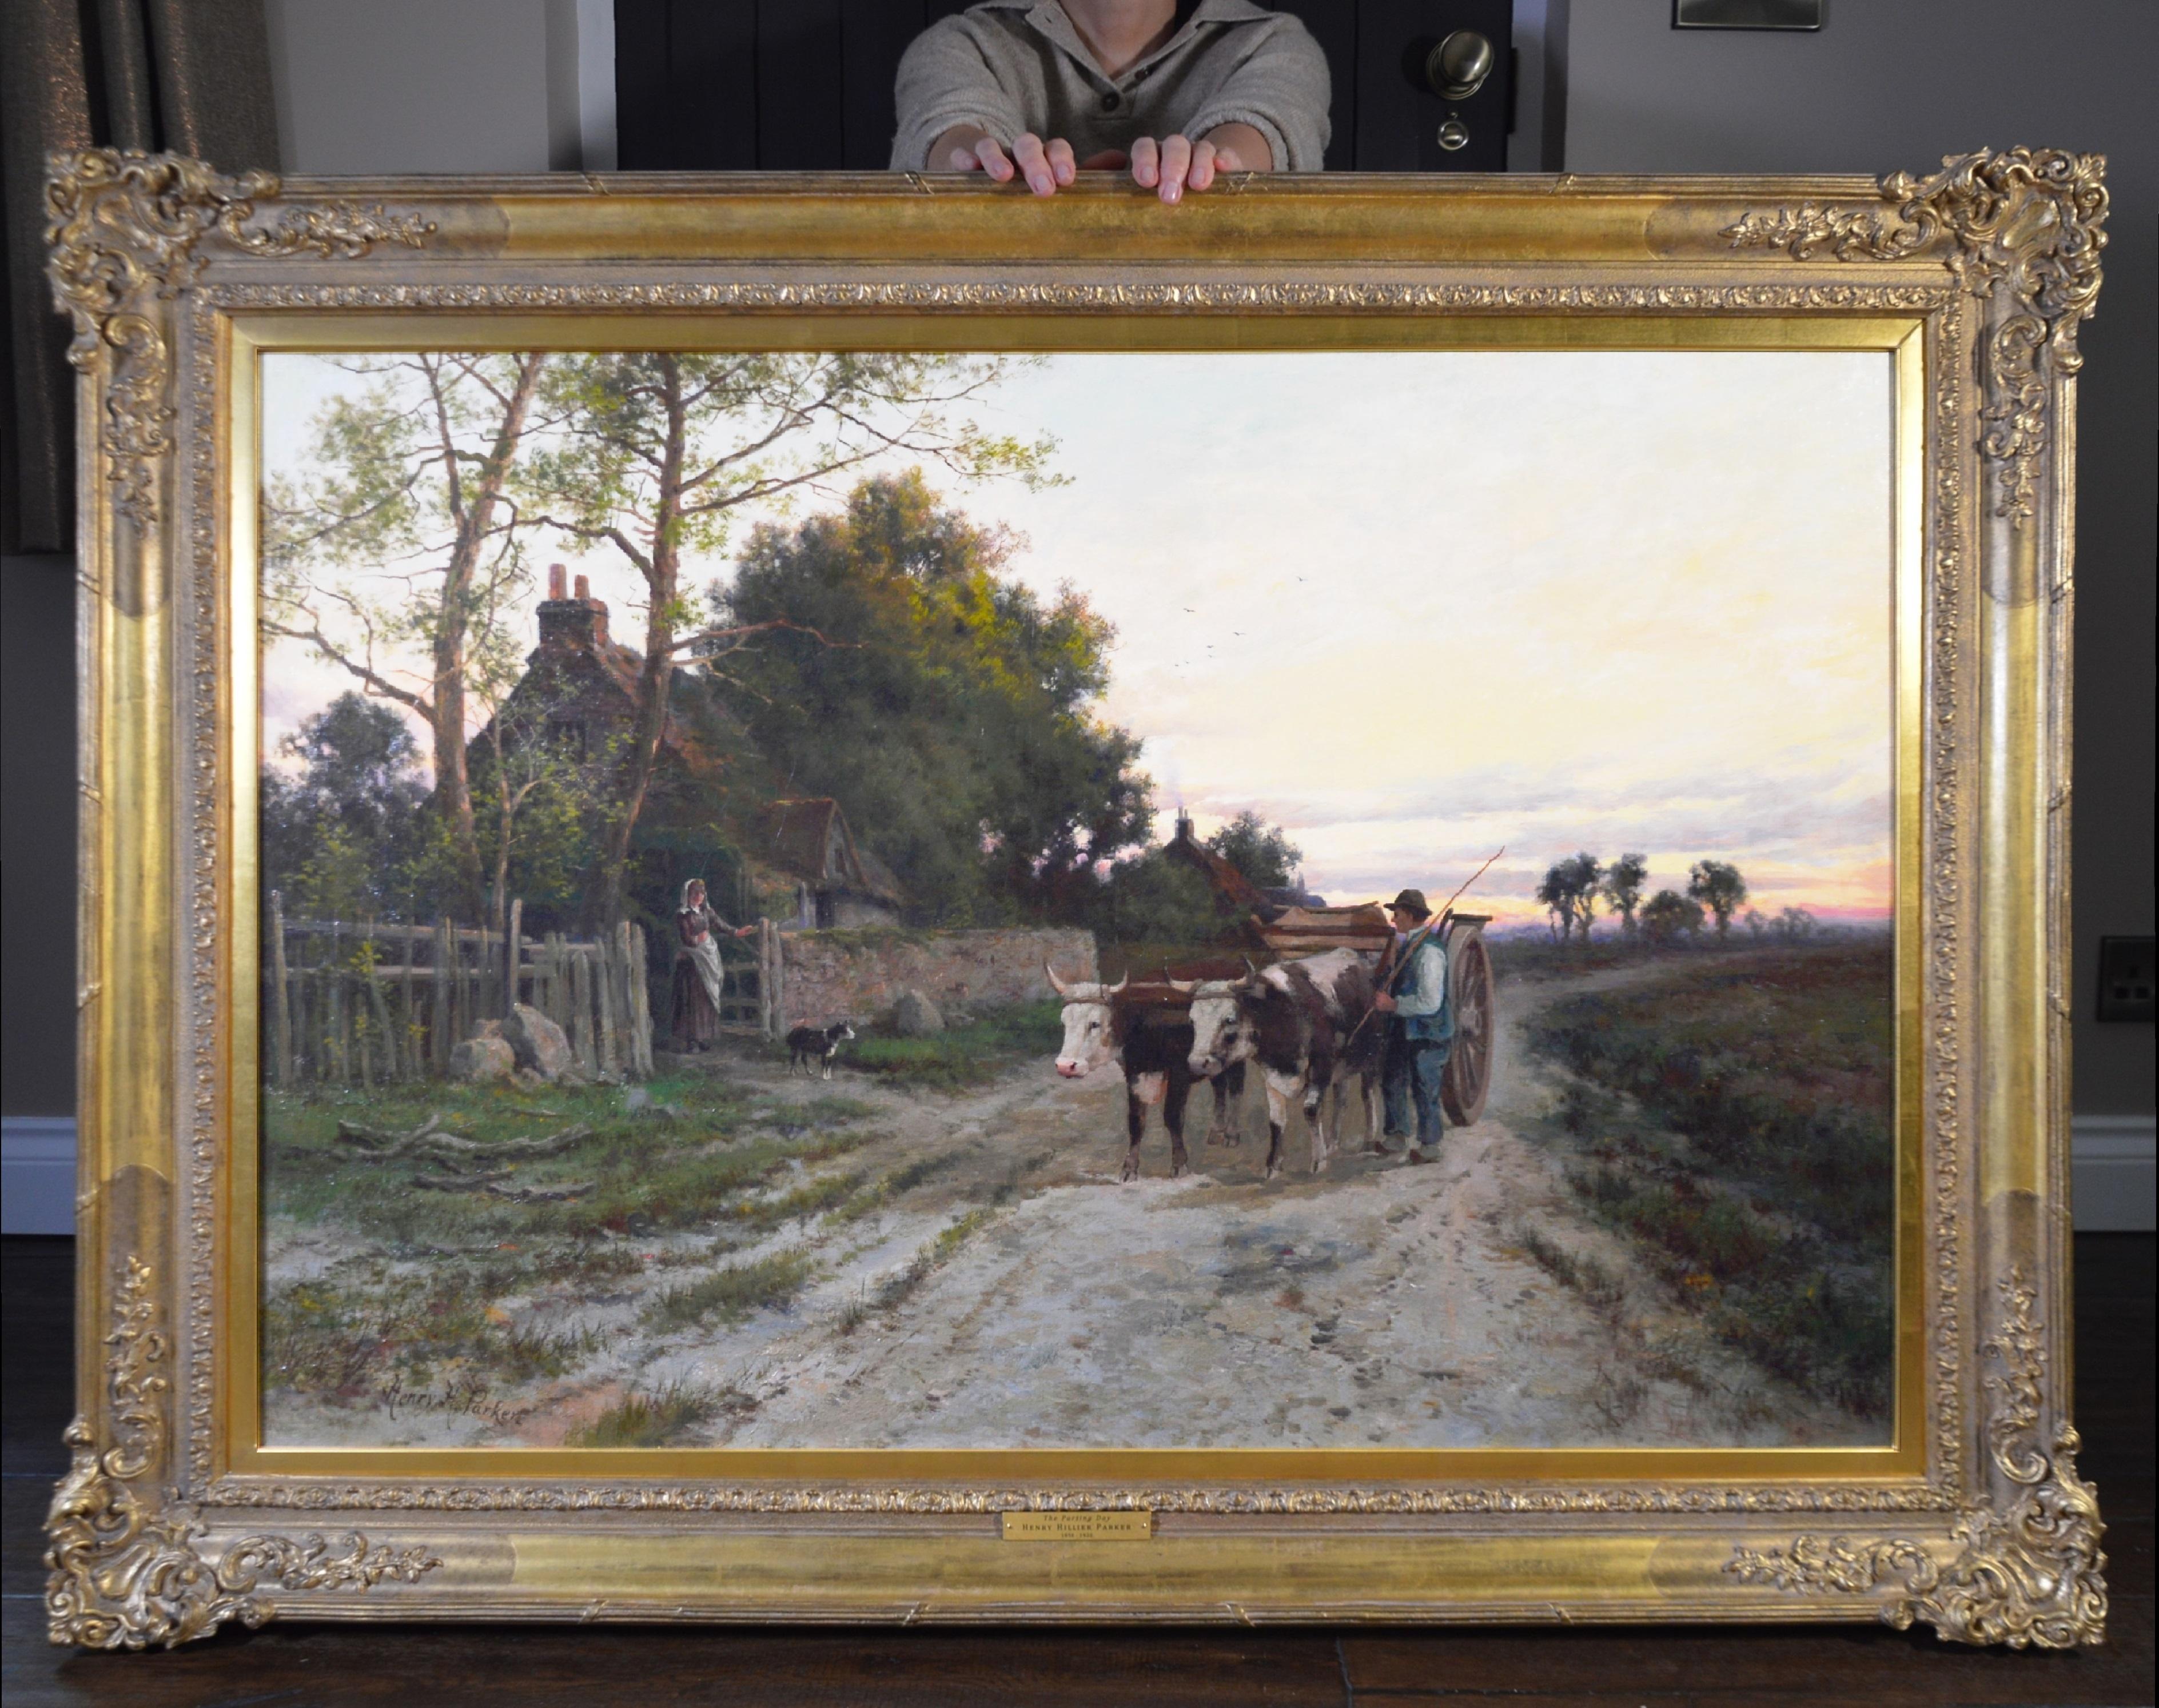 Henry H Parker Animal Painting - The Parting Day - V Large 19th Century Oil Painting English Sunset Landscape